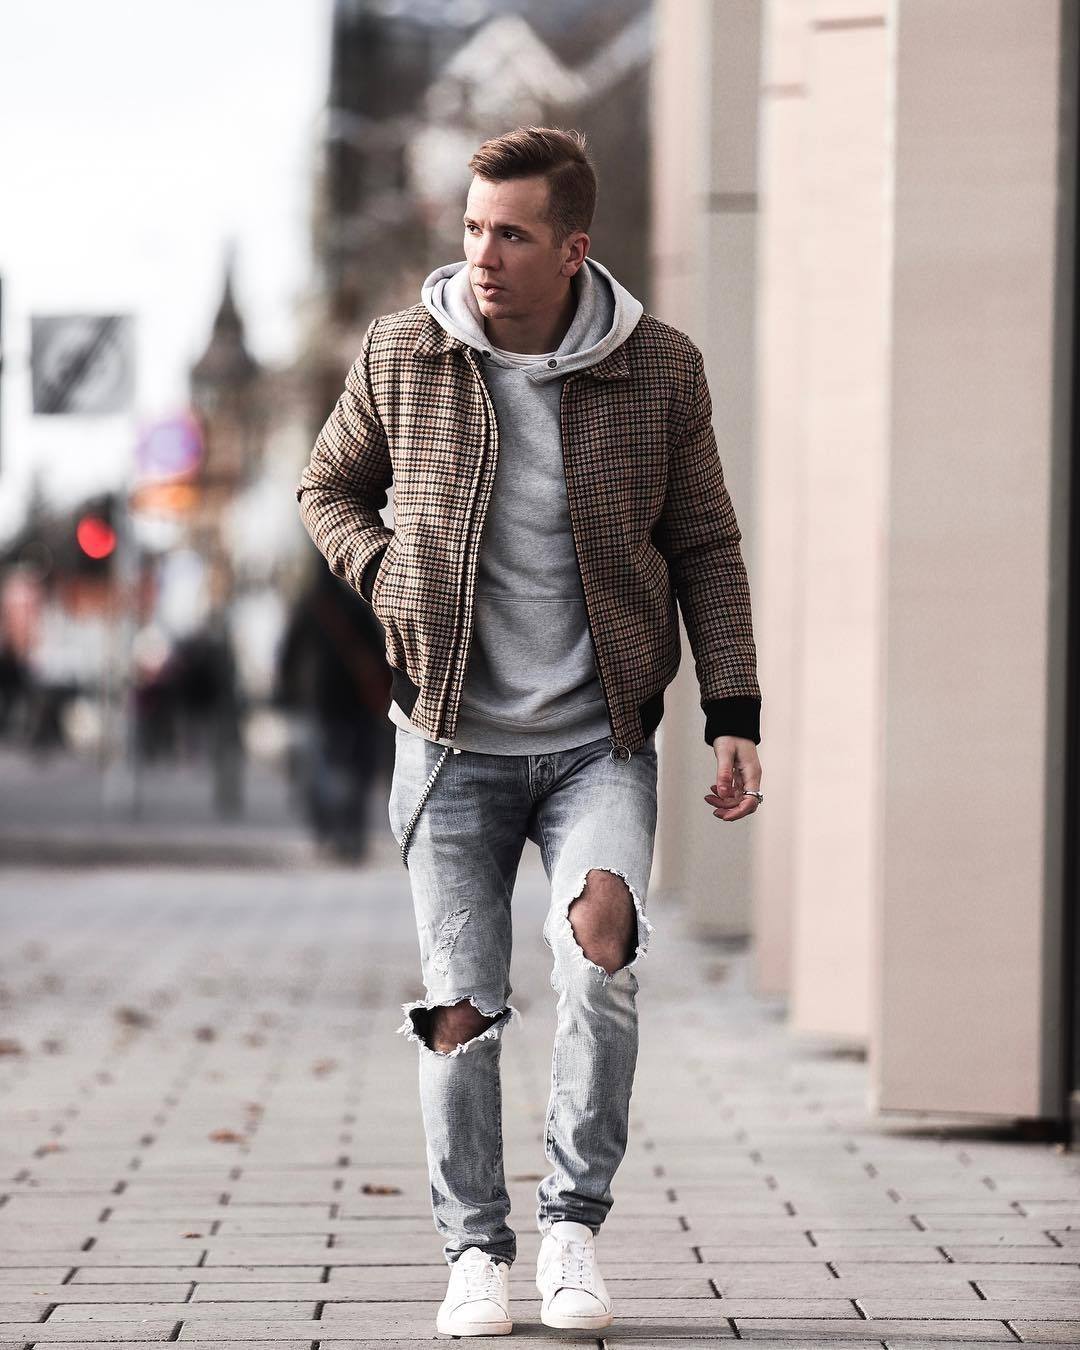 25 Best Outfits For Men to Wear in December 2022